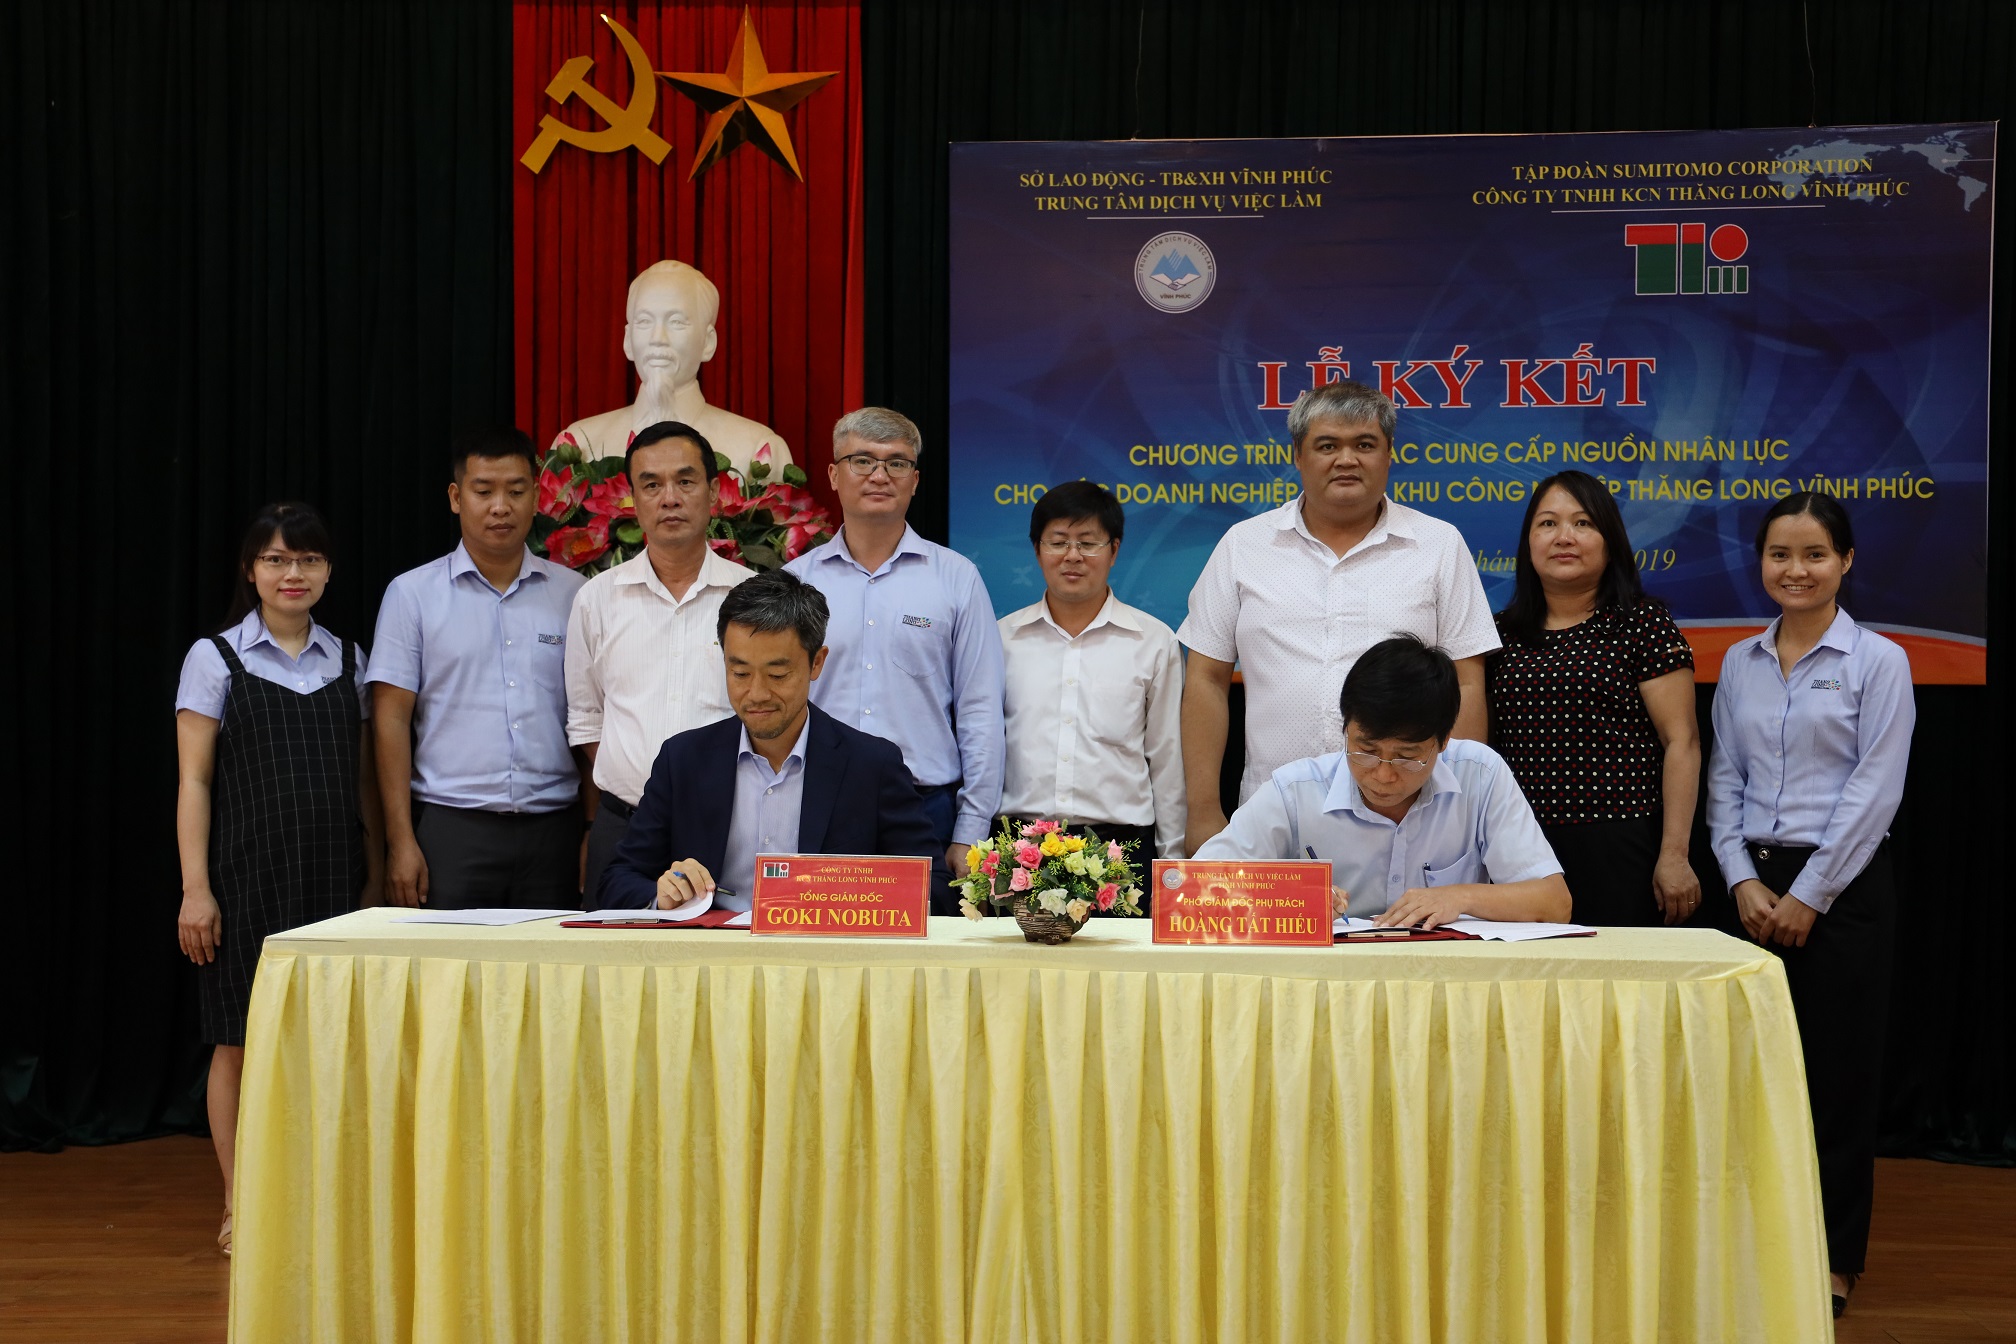 SIGN THE MINUTE WITH THE  VINH PHUC PEOPLE'S COMMITEE TO CONTINUE RECOVERING THE TENANT'S RECRUITMENT ACTIVITIES